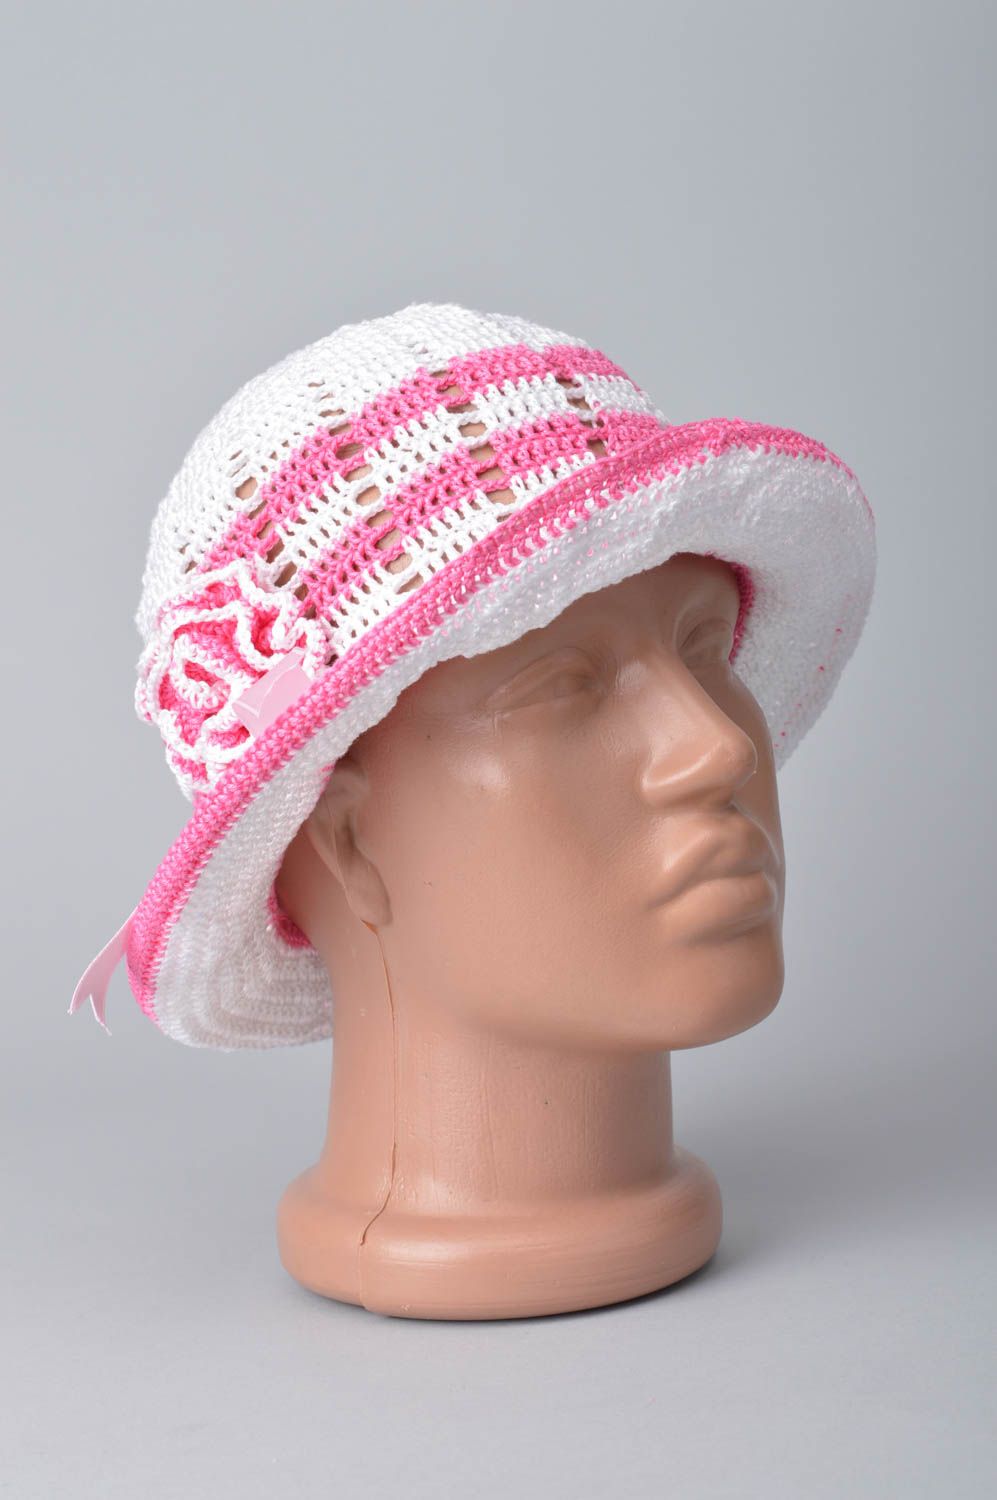 Summer hat crochet baby hat handmade accessories kids accessories gifts for girl photo 1